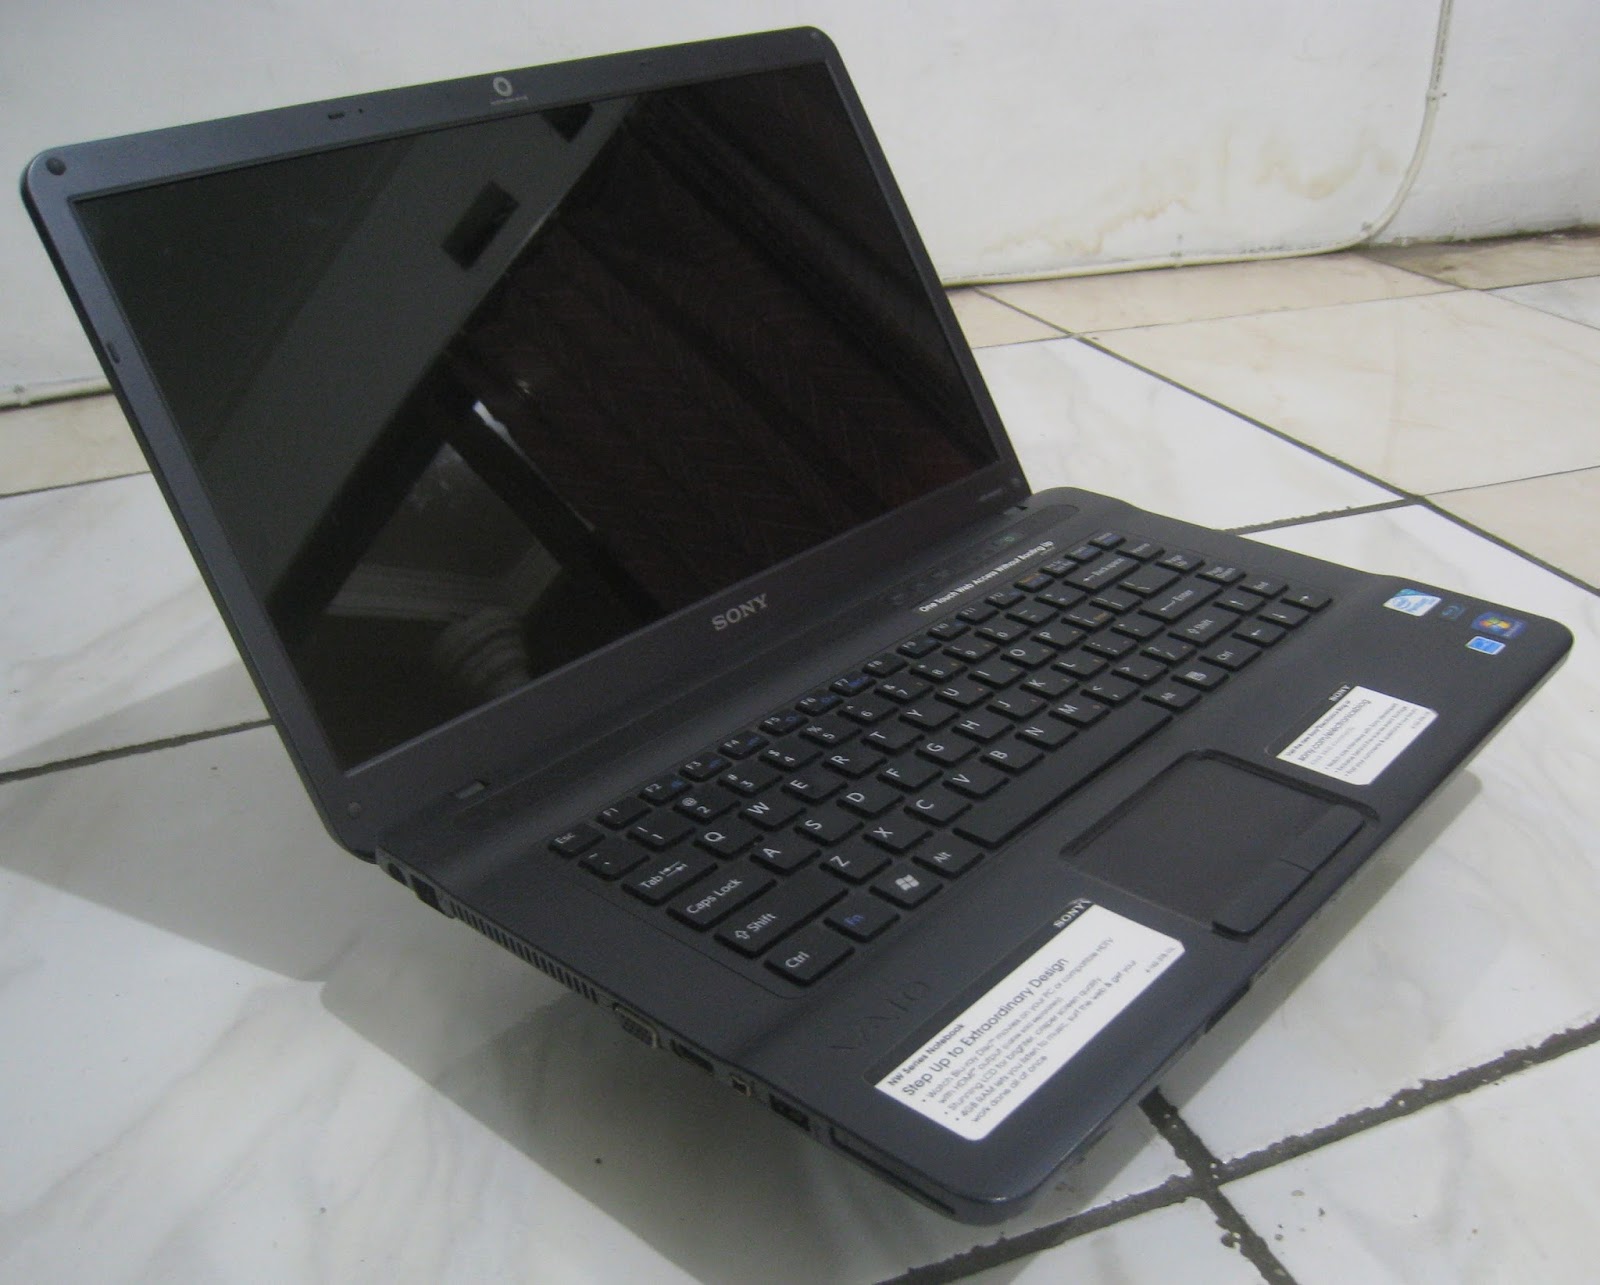 X vgn f1 купить. Ноутбук Sony VAIO VGN-nw130j. Sony VAIO PCG 8112p. VGN nw27gf. Second hand Sony Laptops for sale.